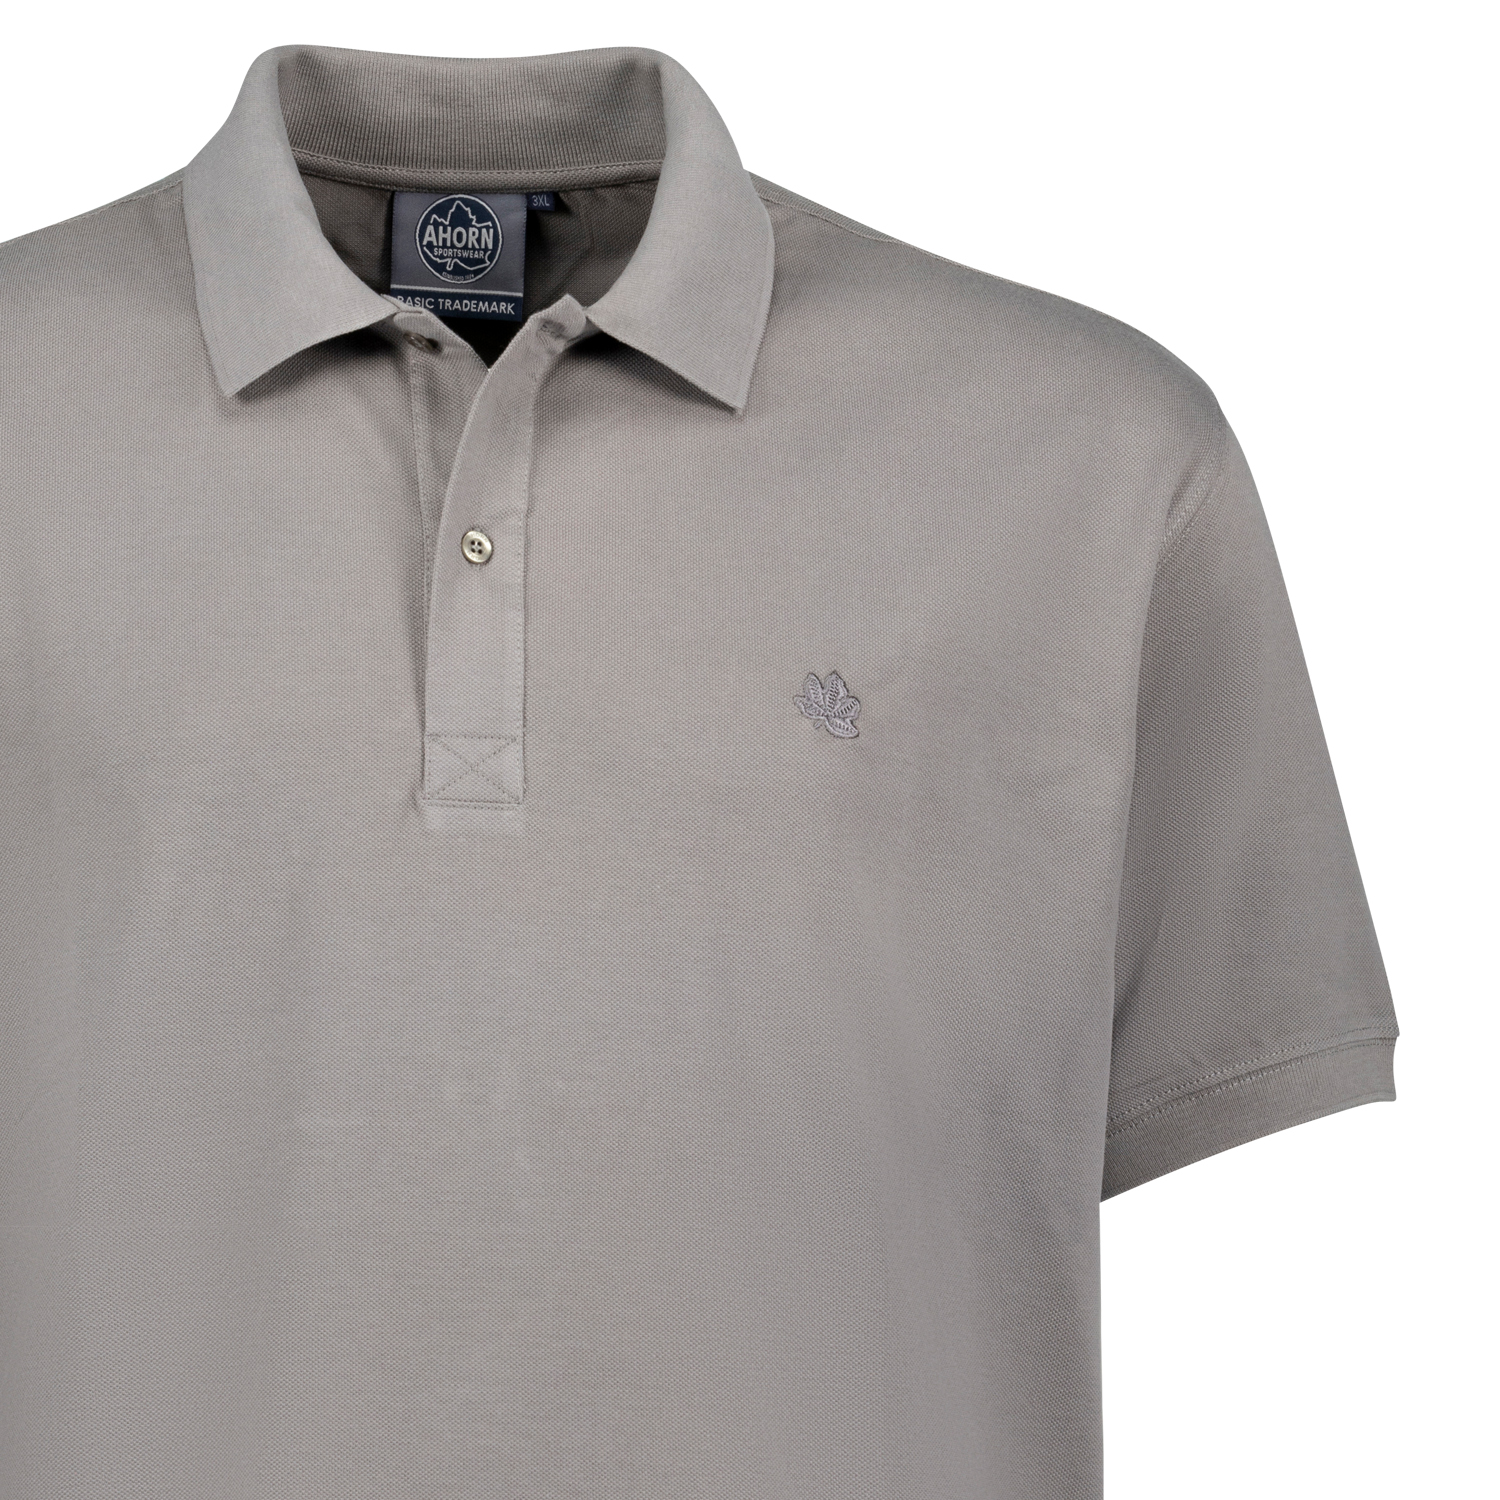 Poloshirt for men by Ahorn Sportswear in extra large sizes until 10 XL / steel grey